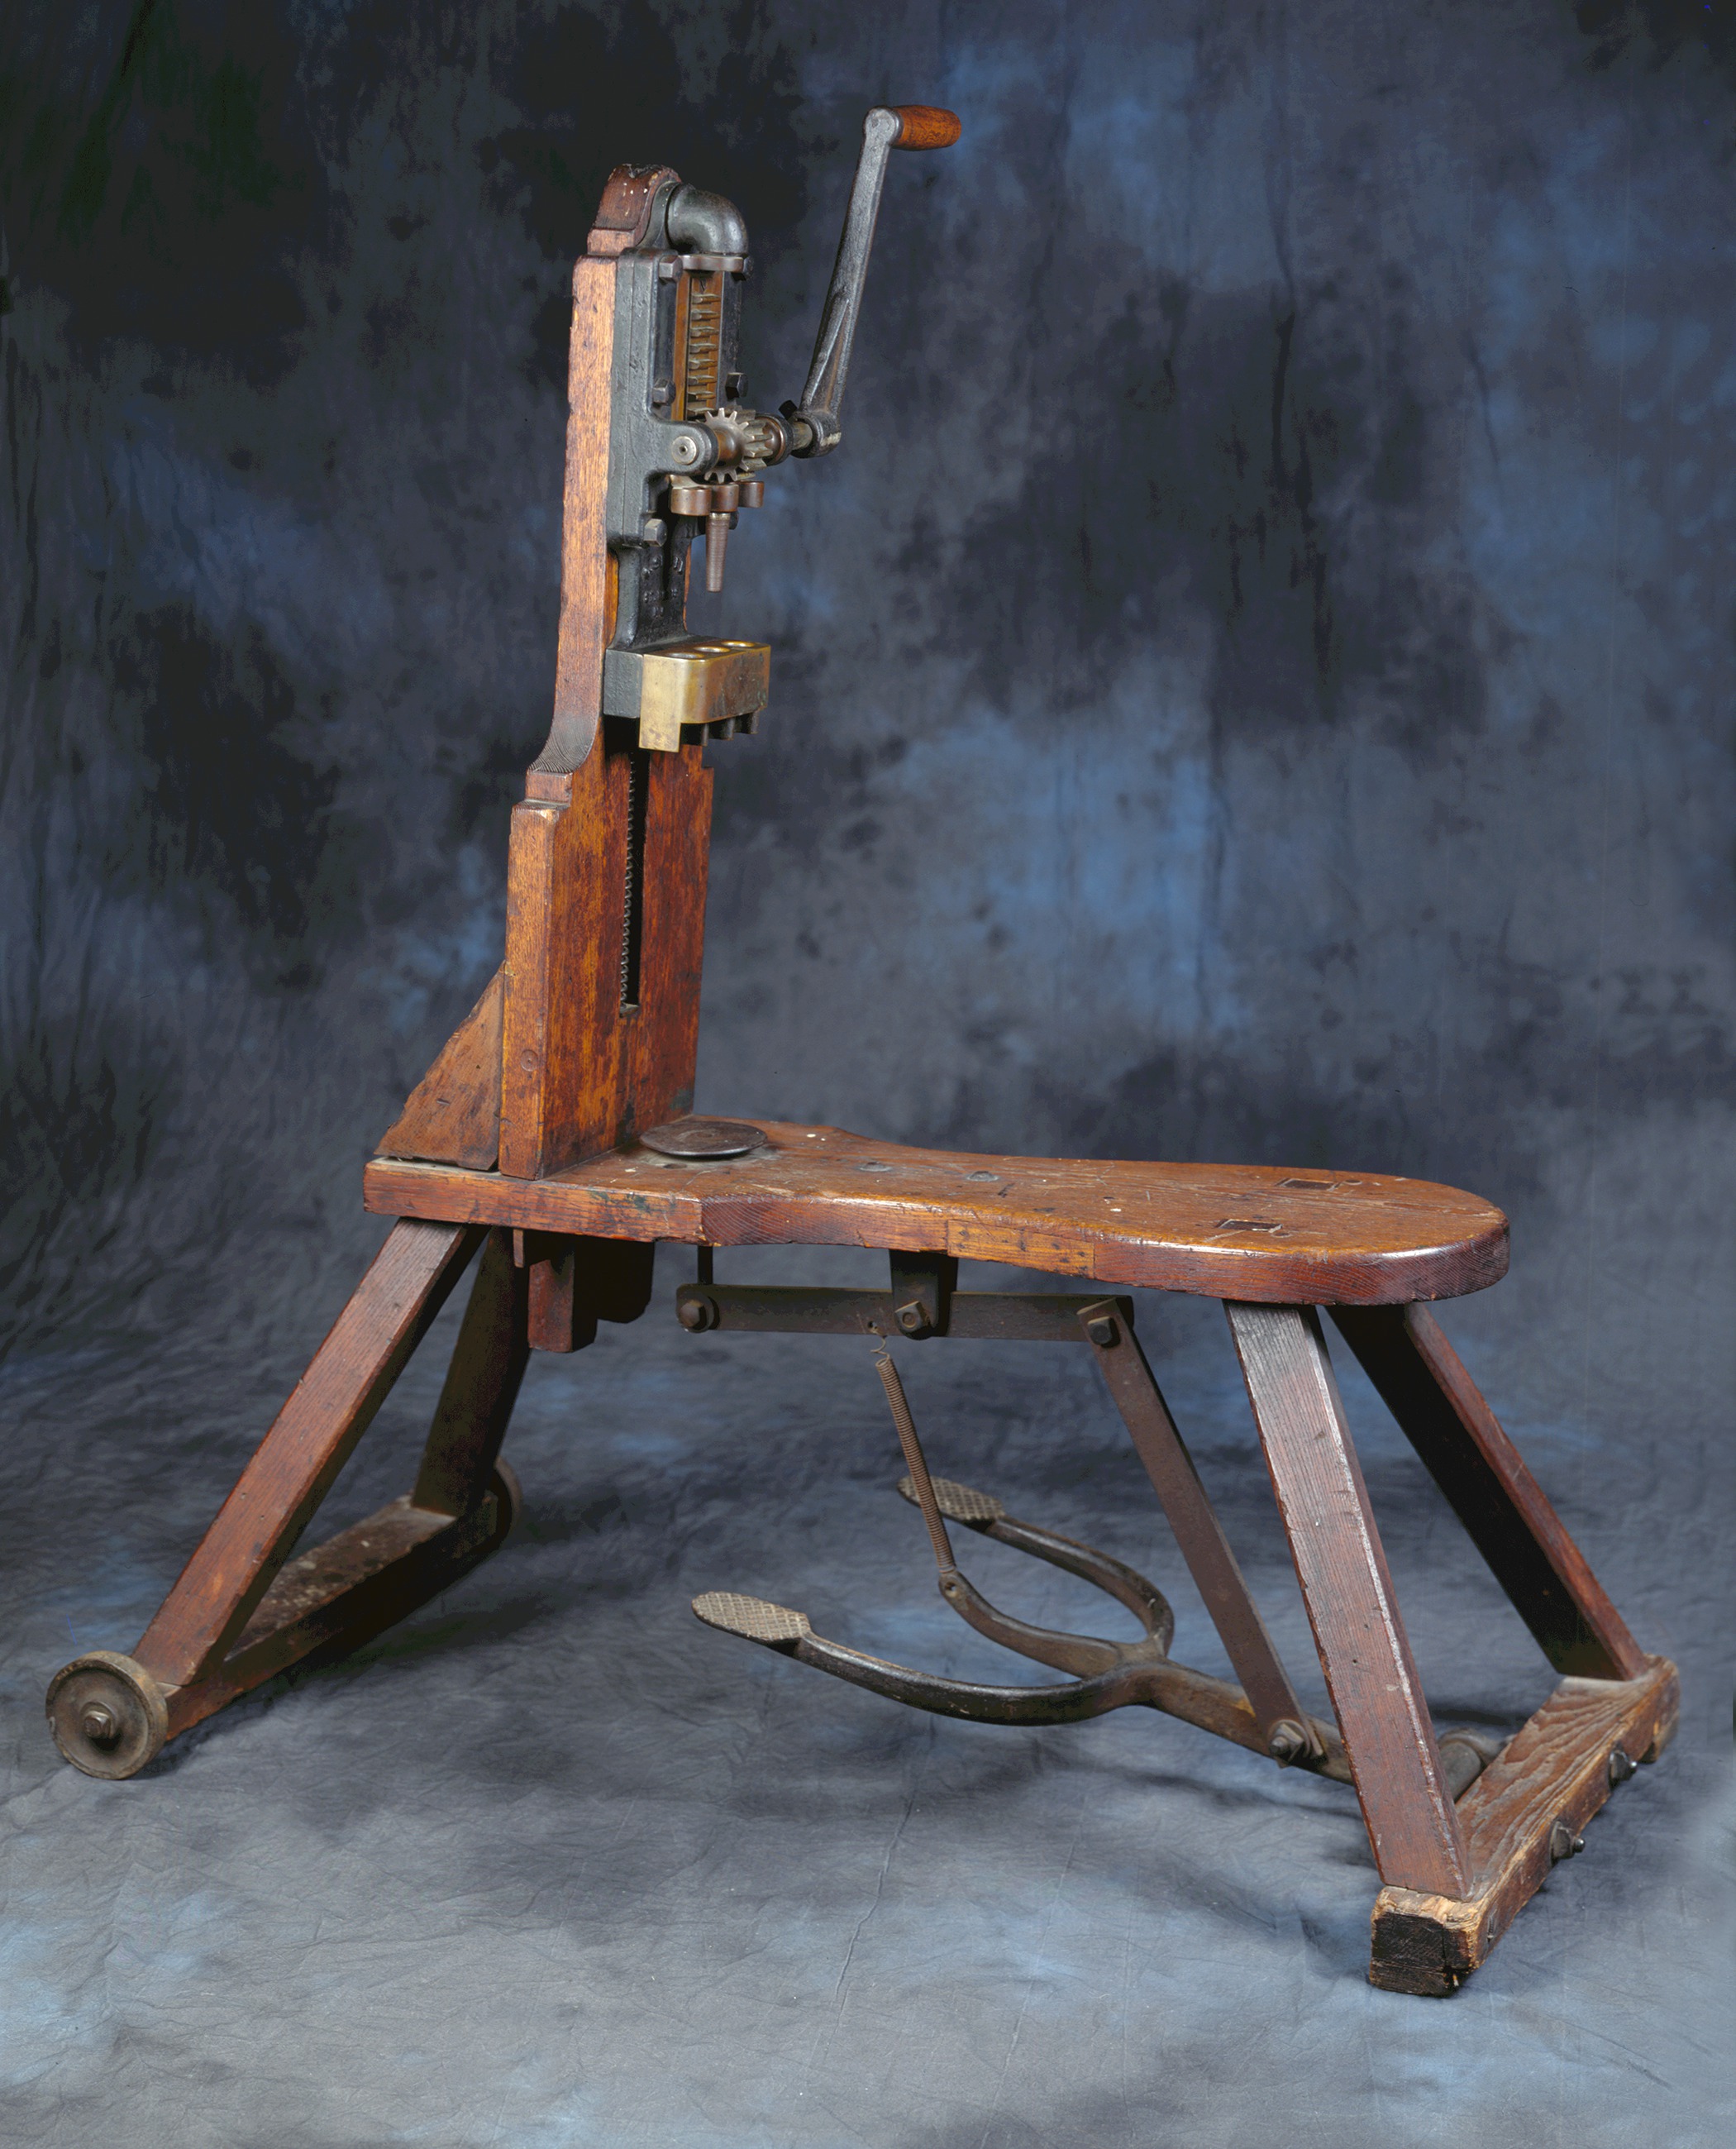 Bottle corking machine used at the Adam Lemp brewery in St. Louis, Missouri, c. 1870 - operator's seat, hand lever attached to various size cork holders, and foot mechanism to lift the bottle up to the cork.jpg